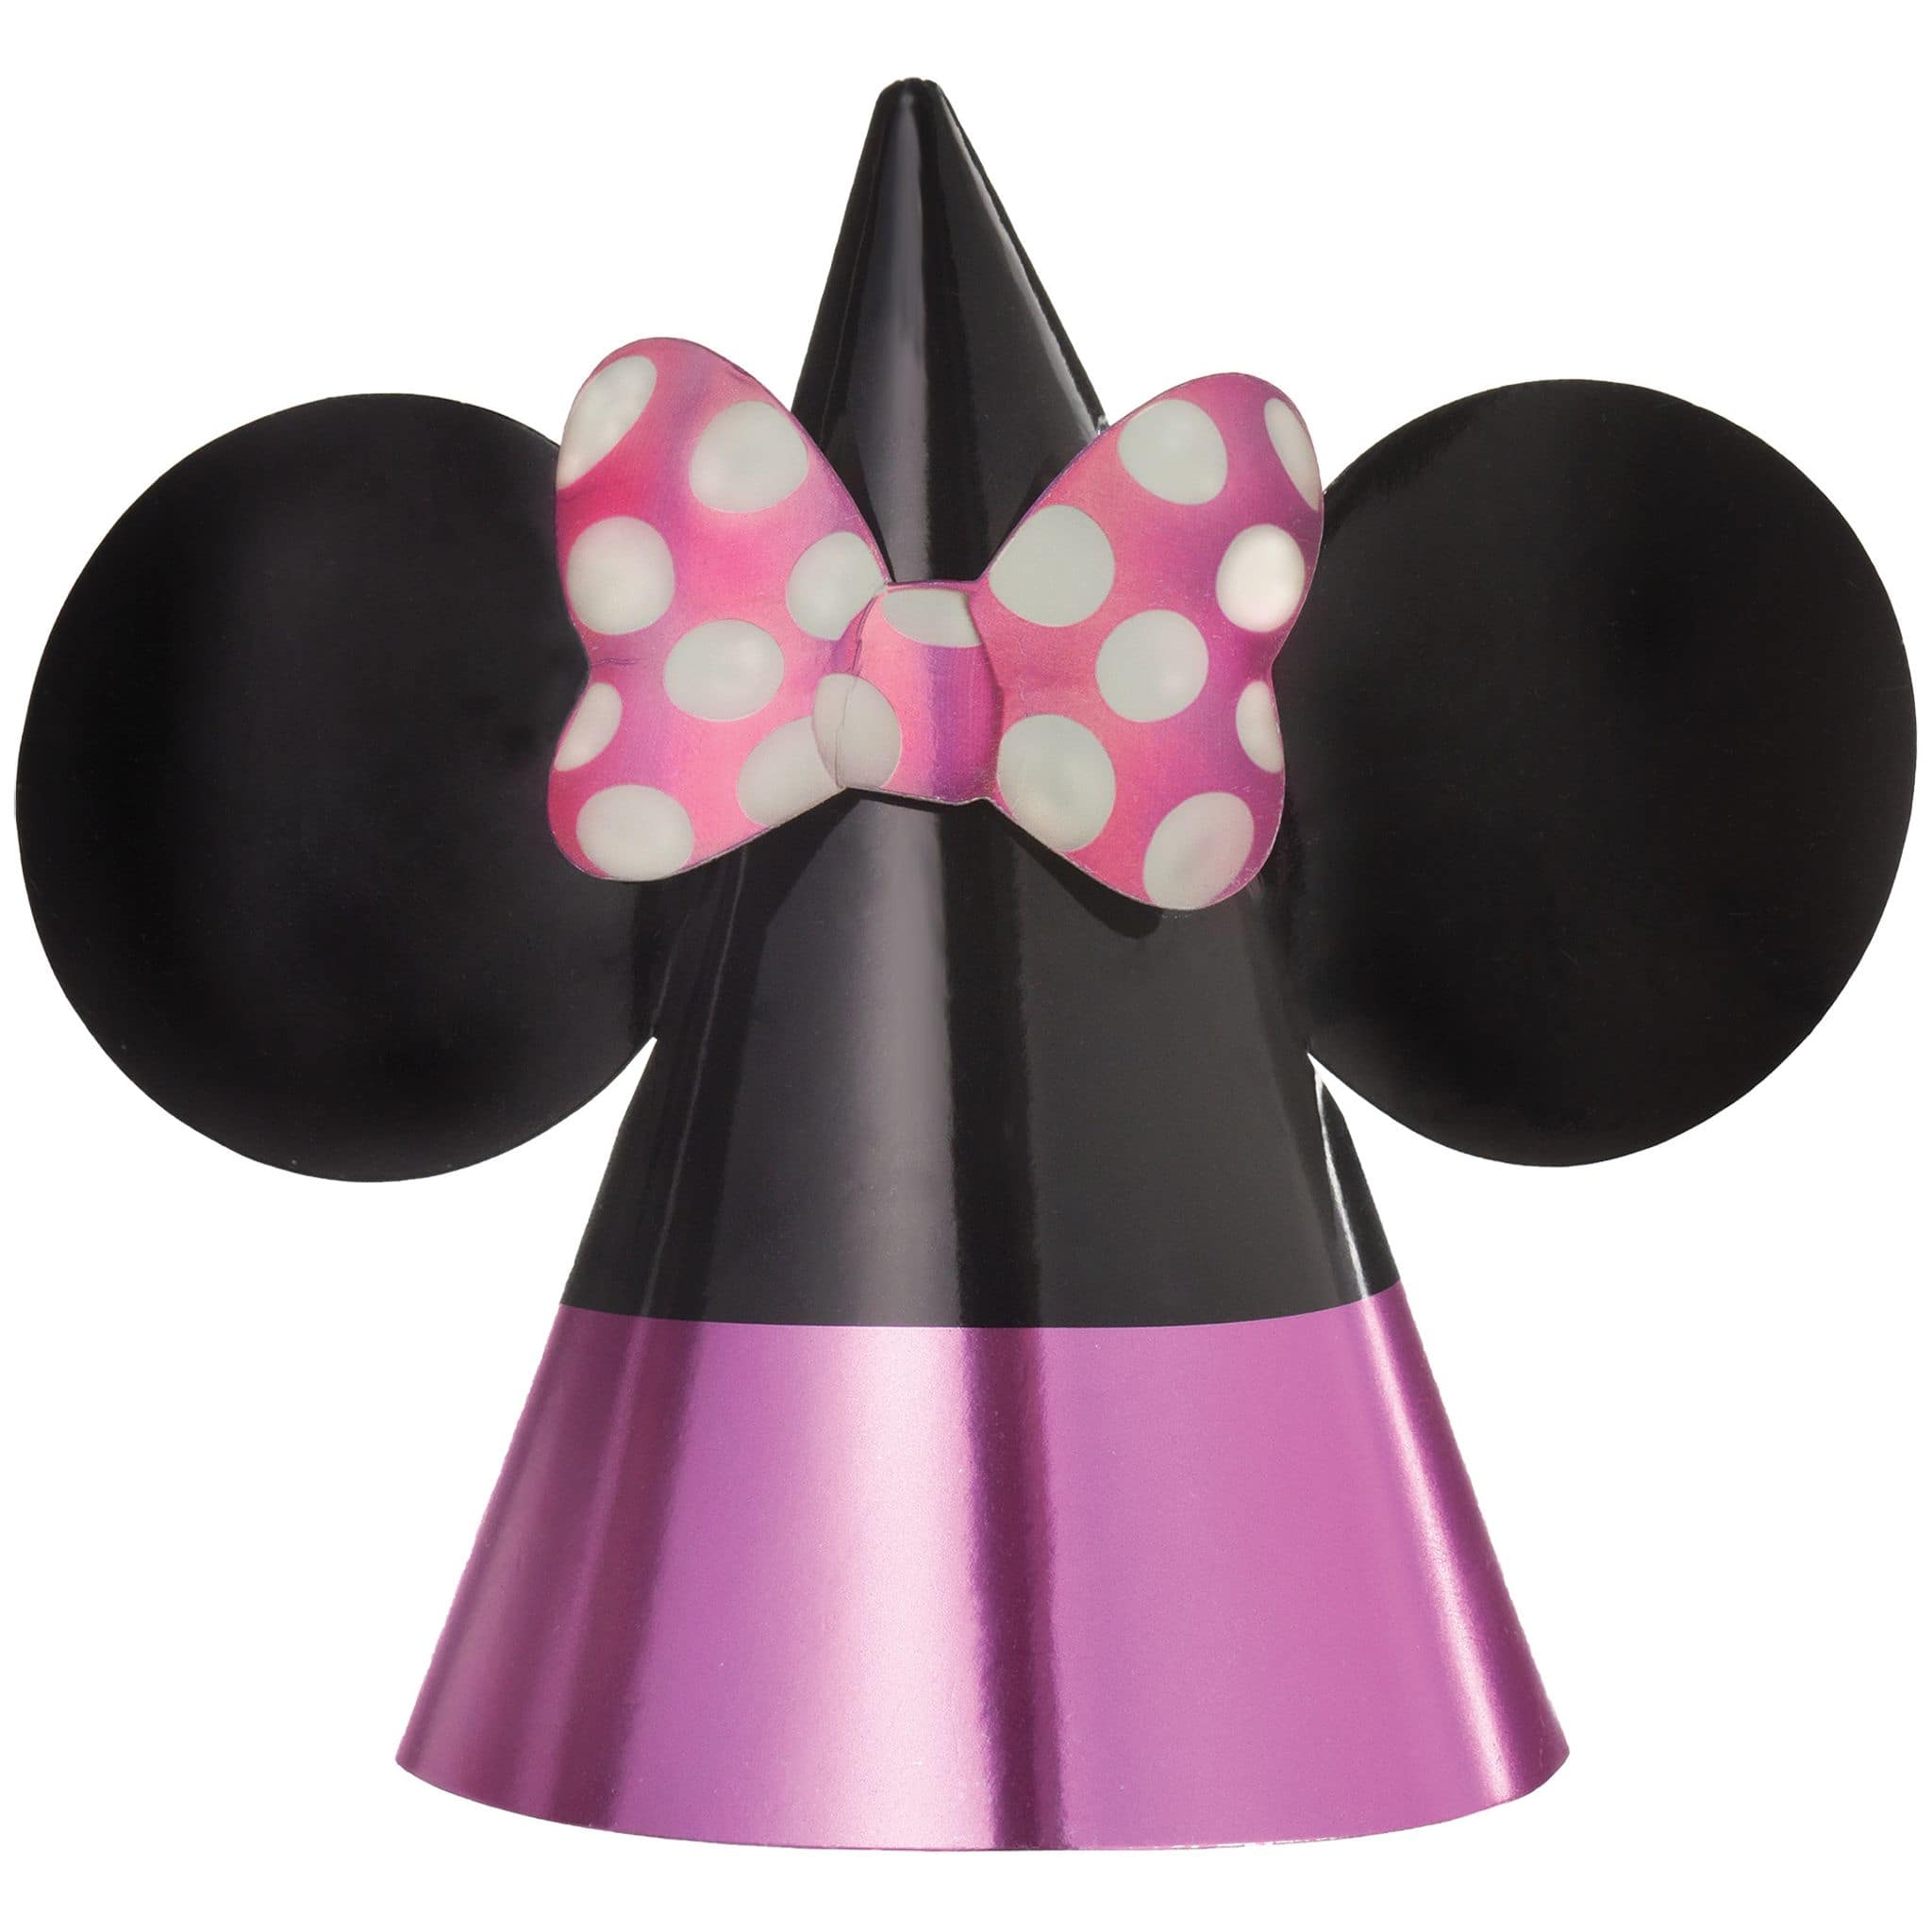 Minnie Mouse Forever Foil Cone Hats, 24ct.